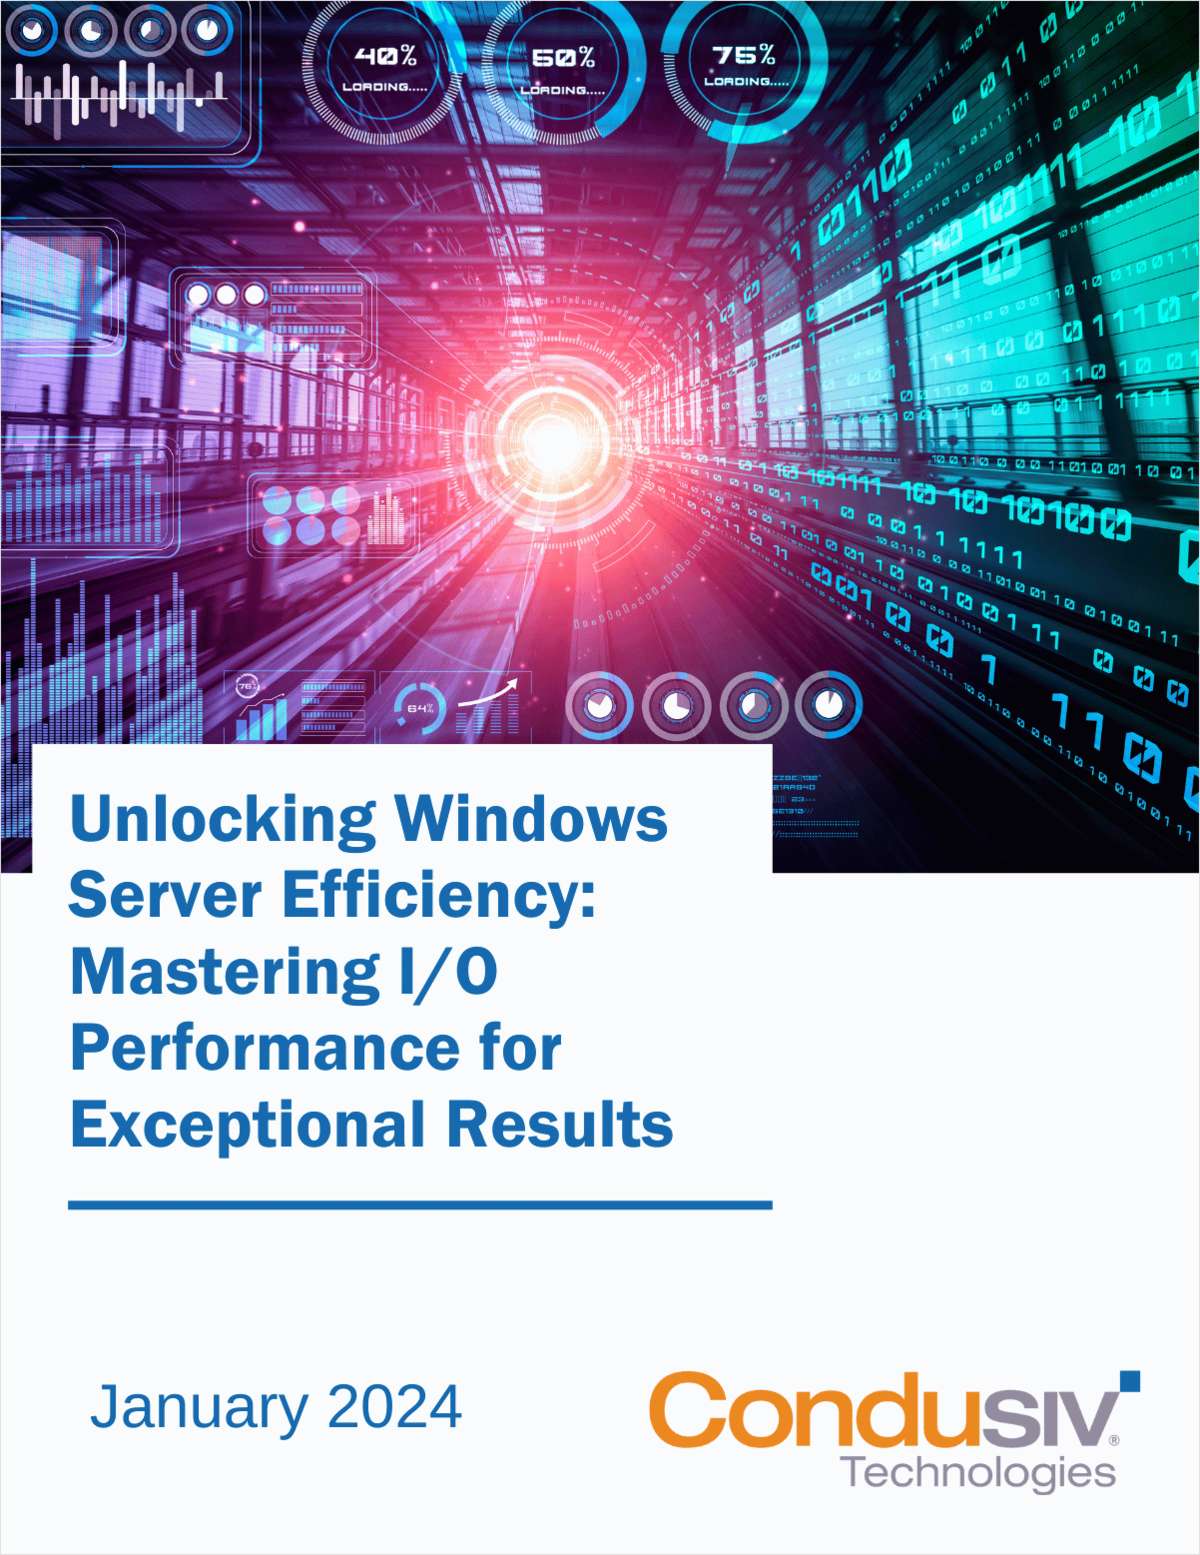 Unlocking Windows Server Efficiency: Mastering I/O Performance for Exceptional Results